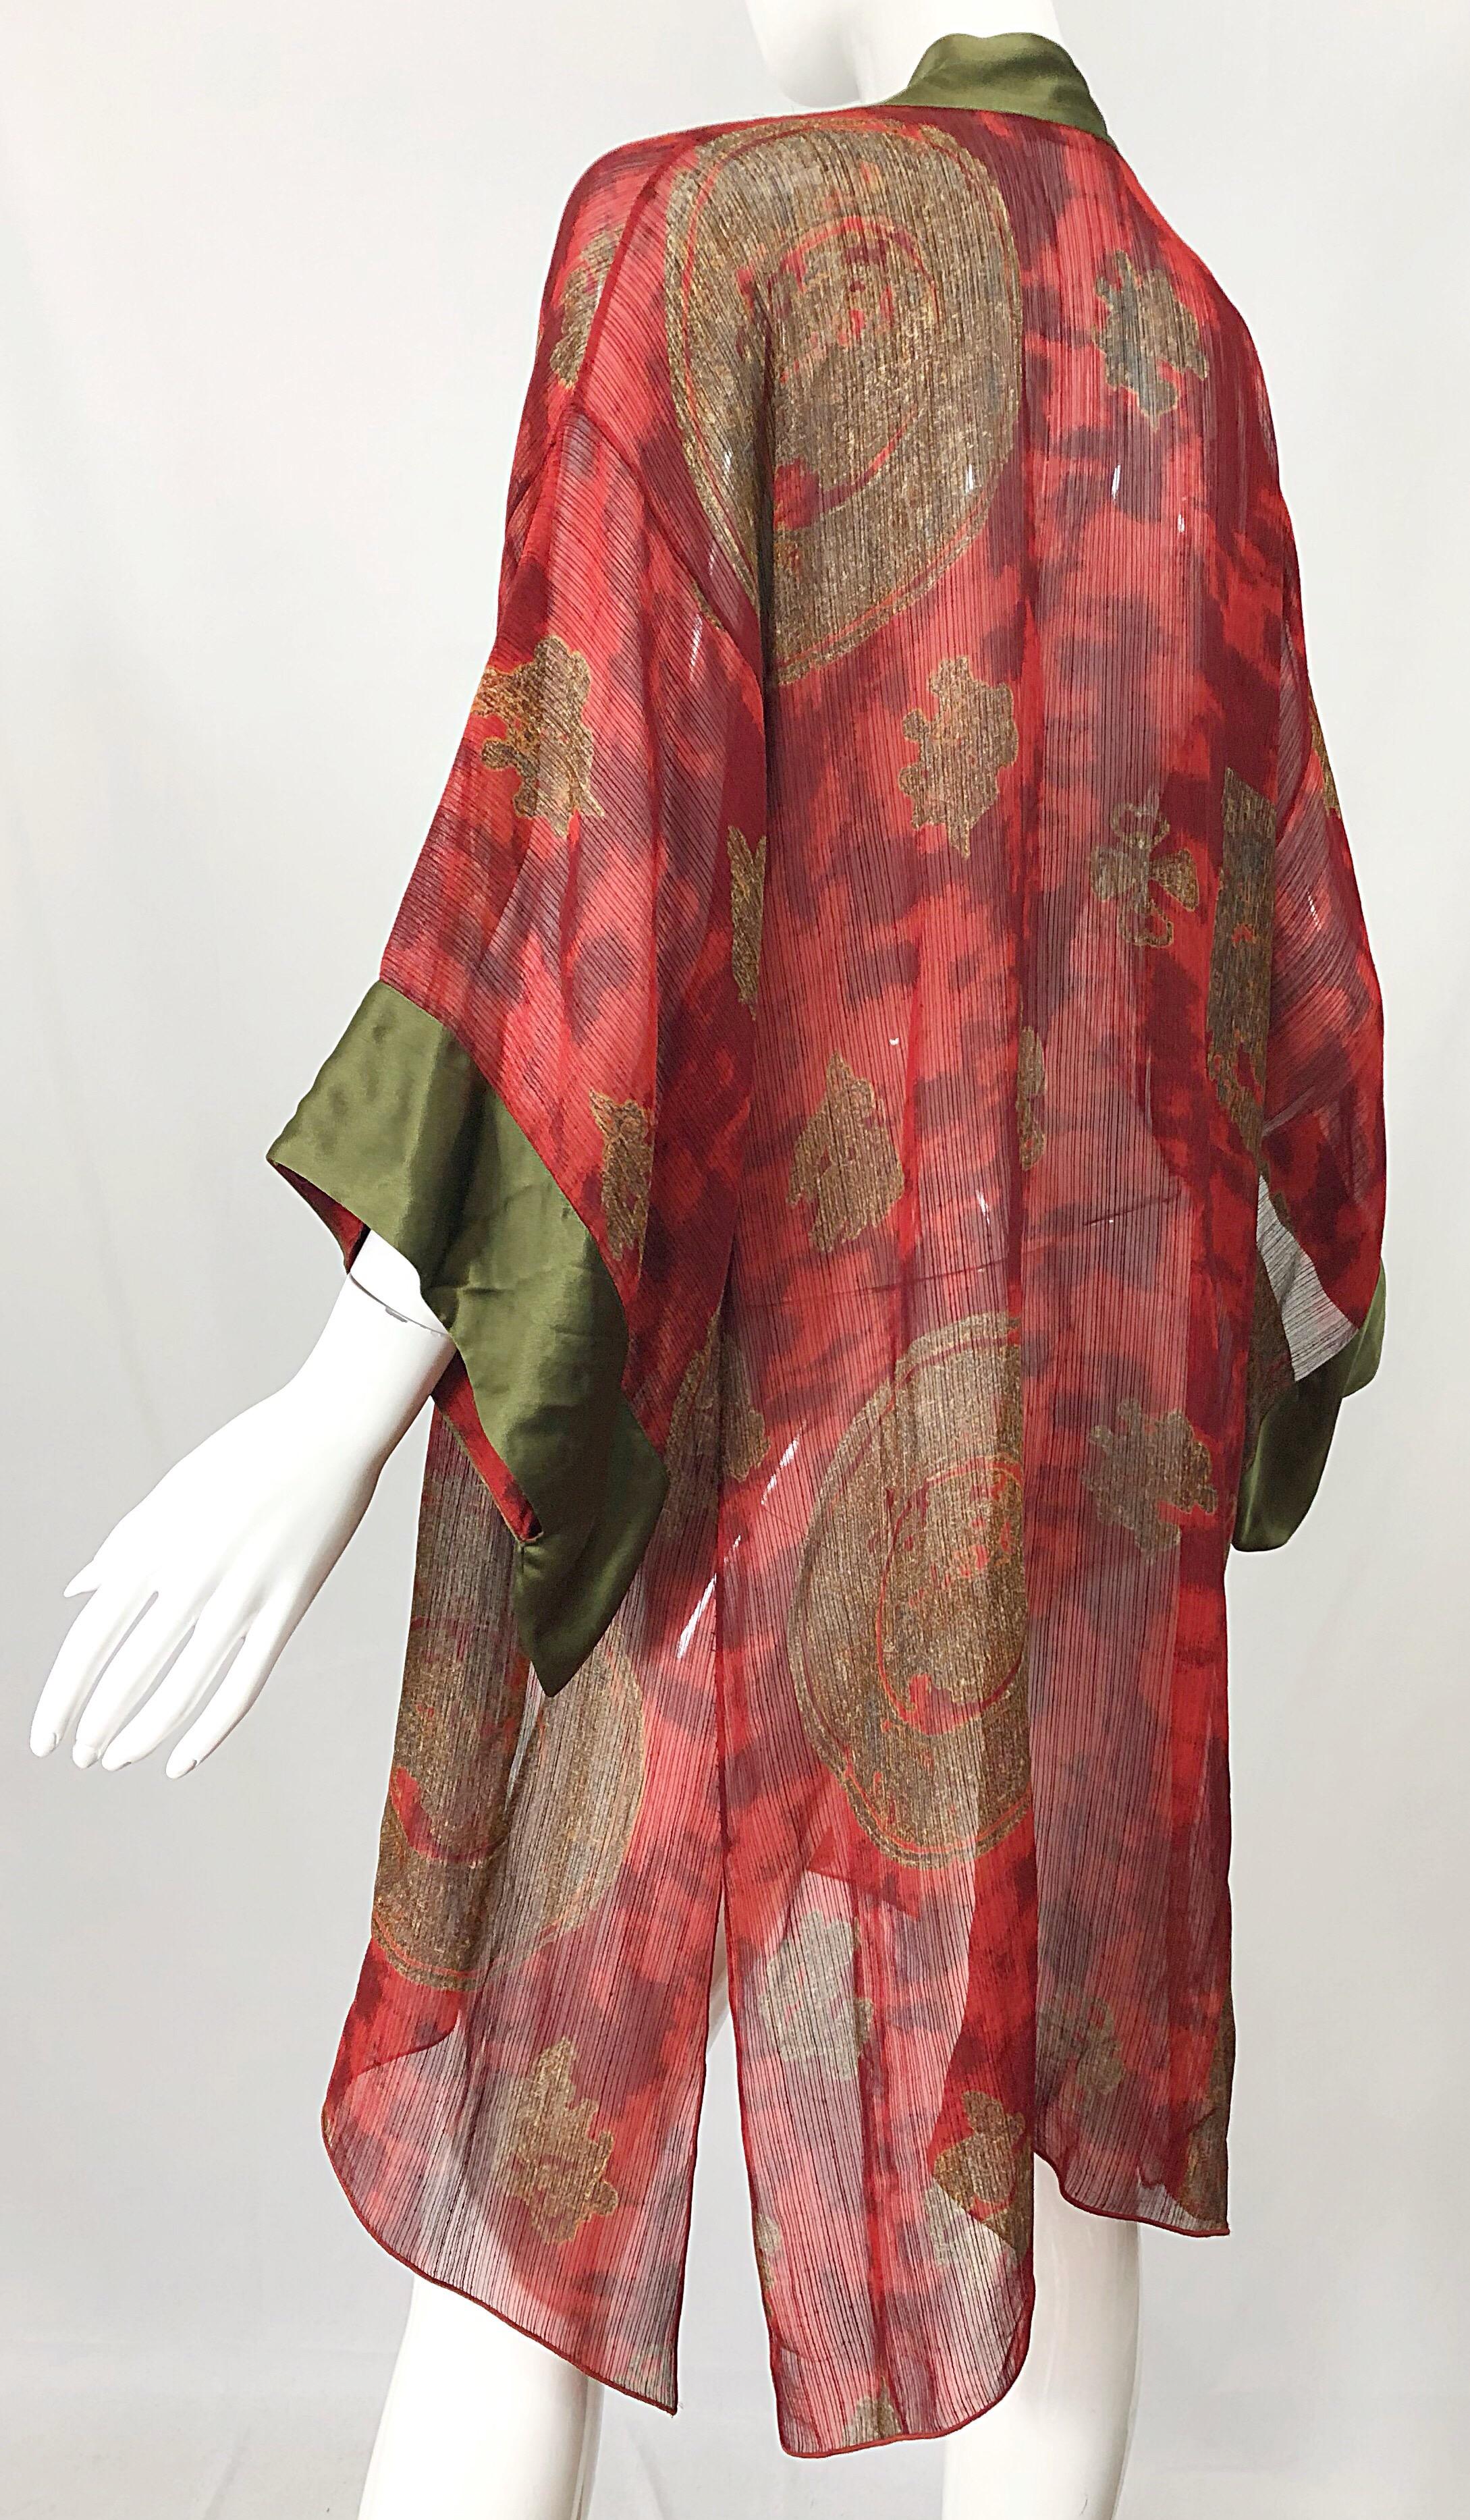 Vintage Holly's Harp Red Olive Green Gold Silk Chiffon Sheer Kimono Jacket In Excellent Condition For Sale In San Diego, CA